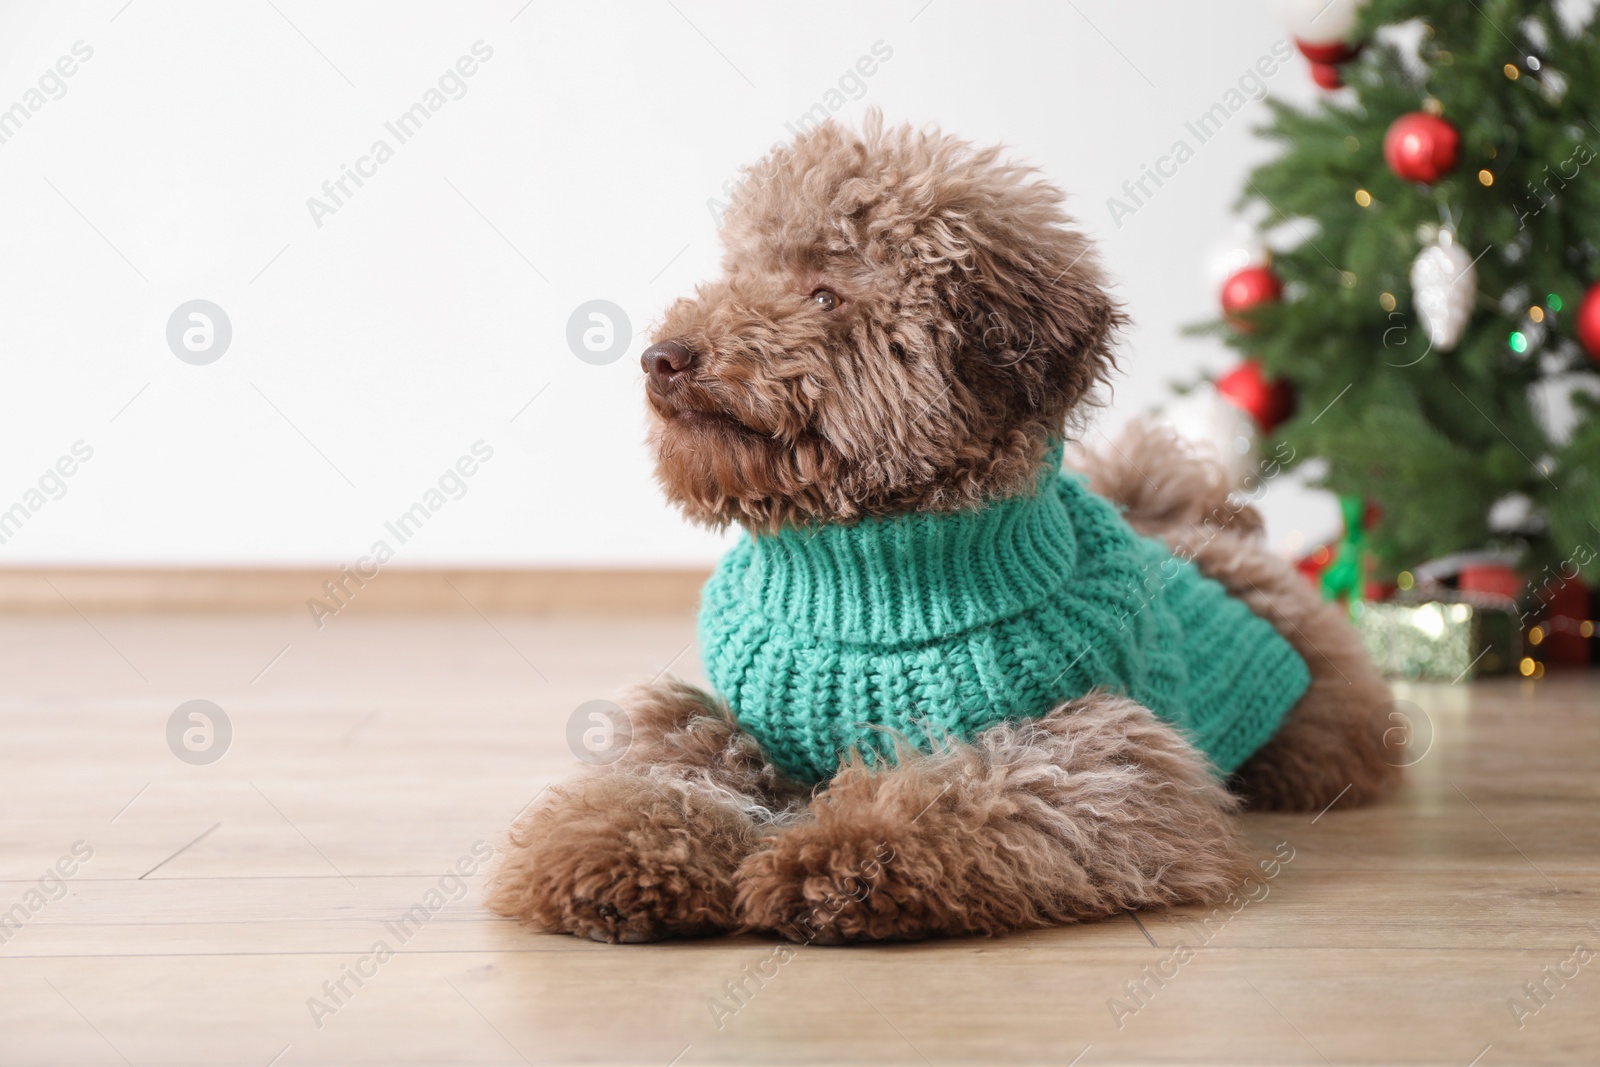 Photo of Cute Toy Poodle dog in knitted sweater and Christmas tree indoors, space for text